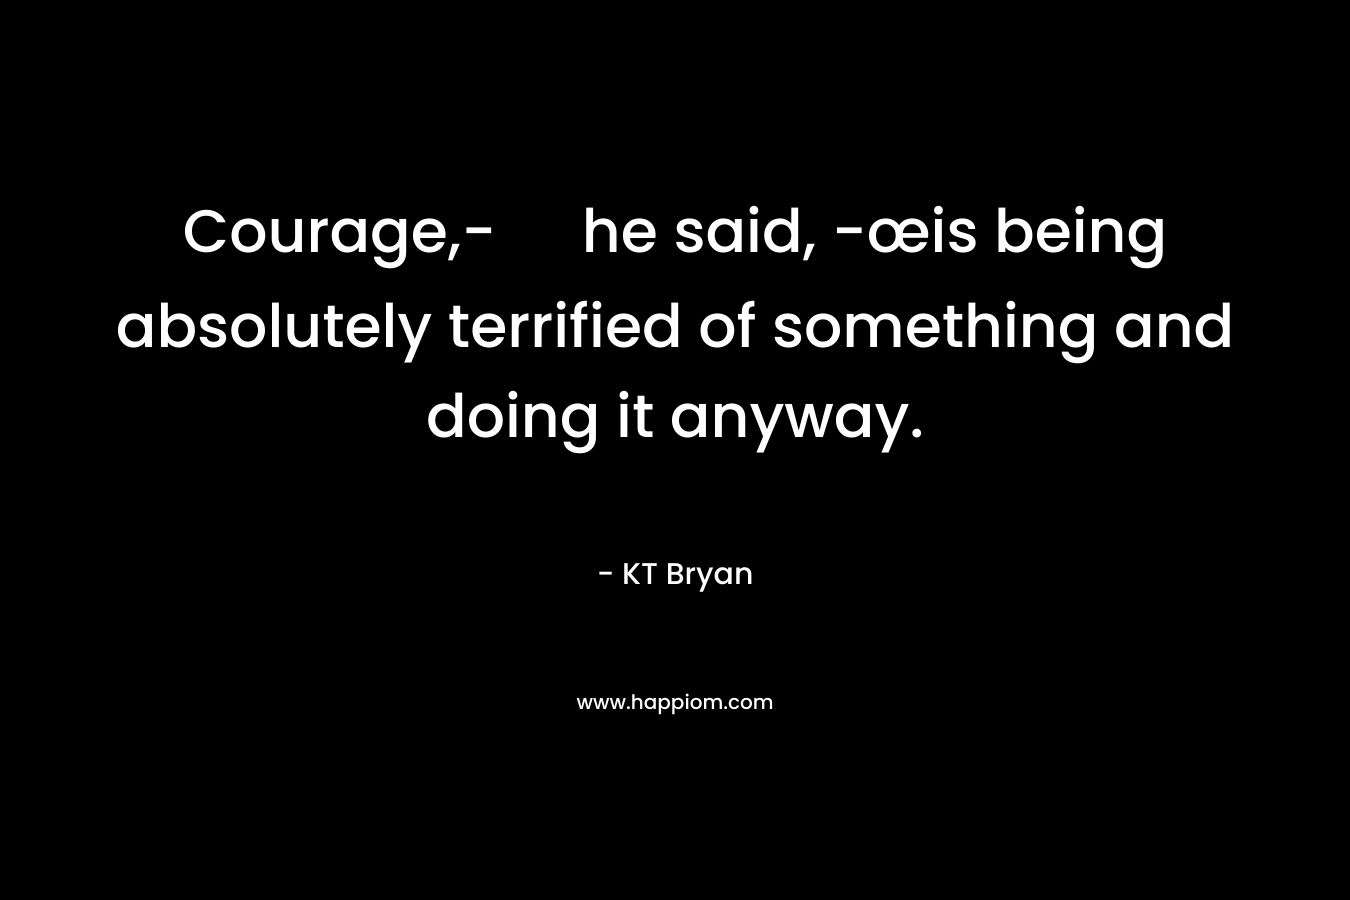 Courage,- he said, -œis being absolutely terrified of something and doing it anyway. – KT Bryan